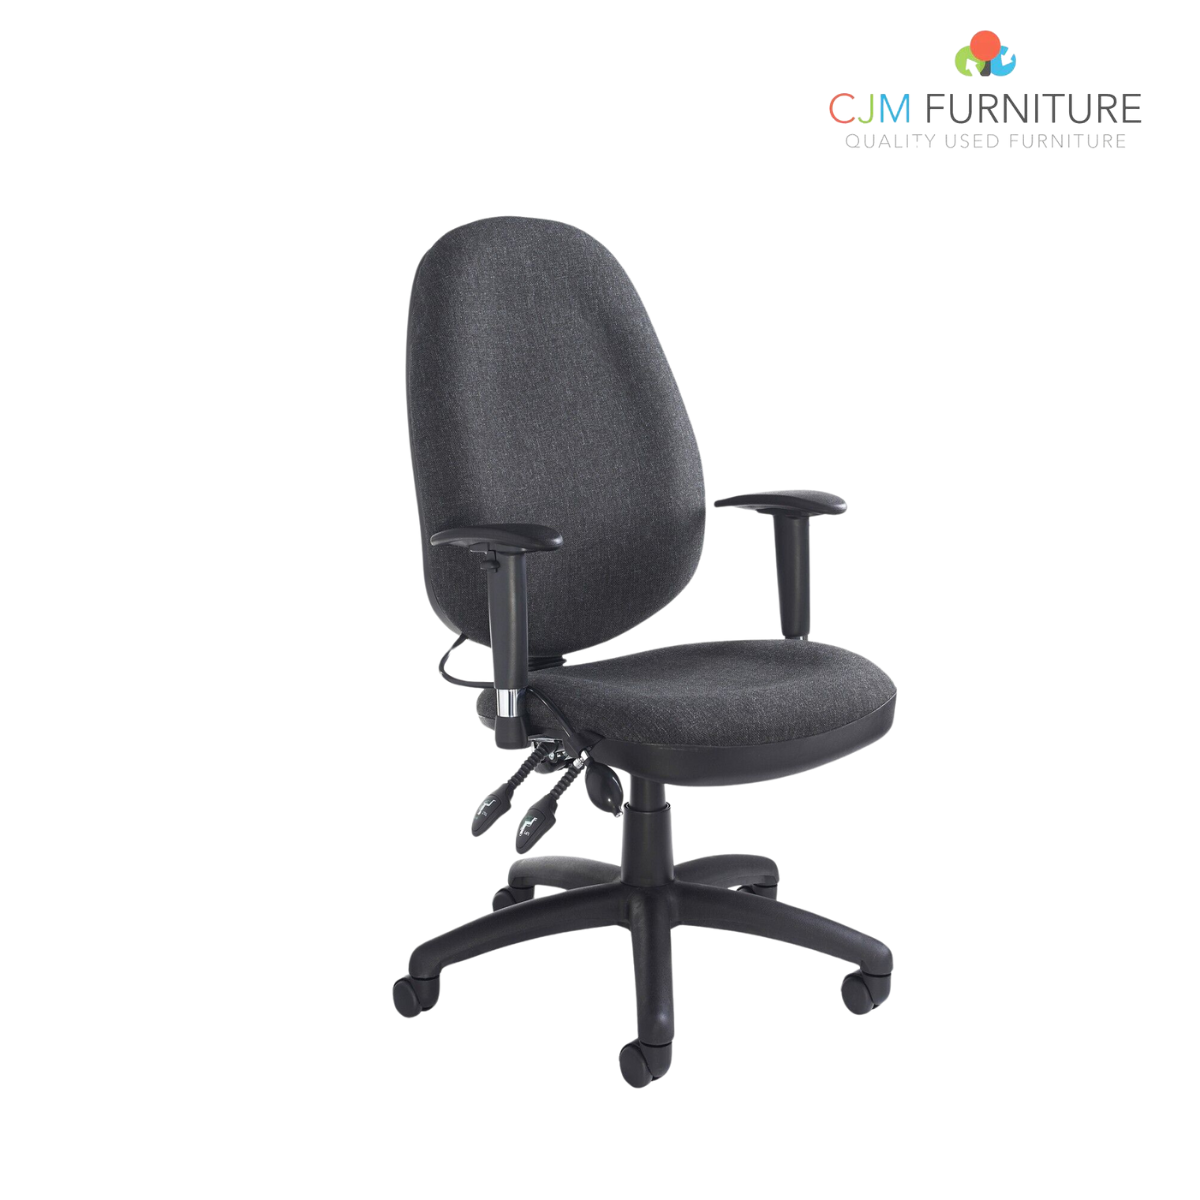 Sofia 2 lever swivel chair with pump  up lumbar support with HA arms   12/04/21